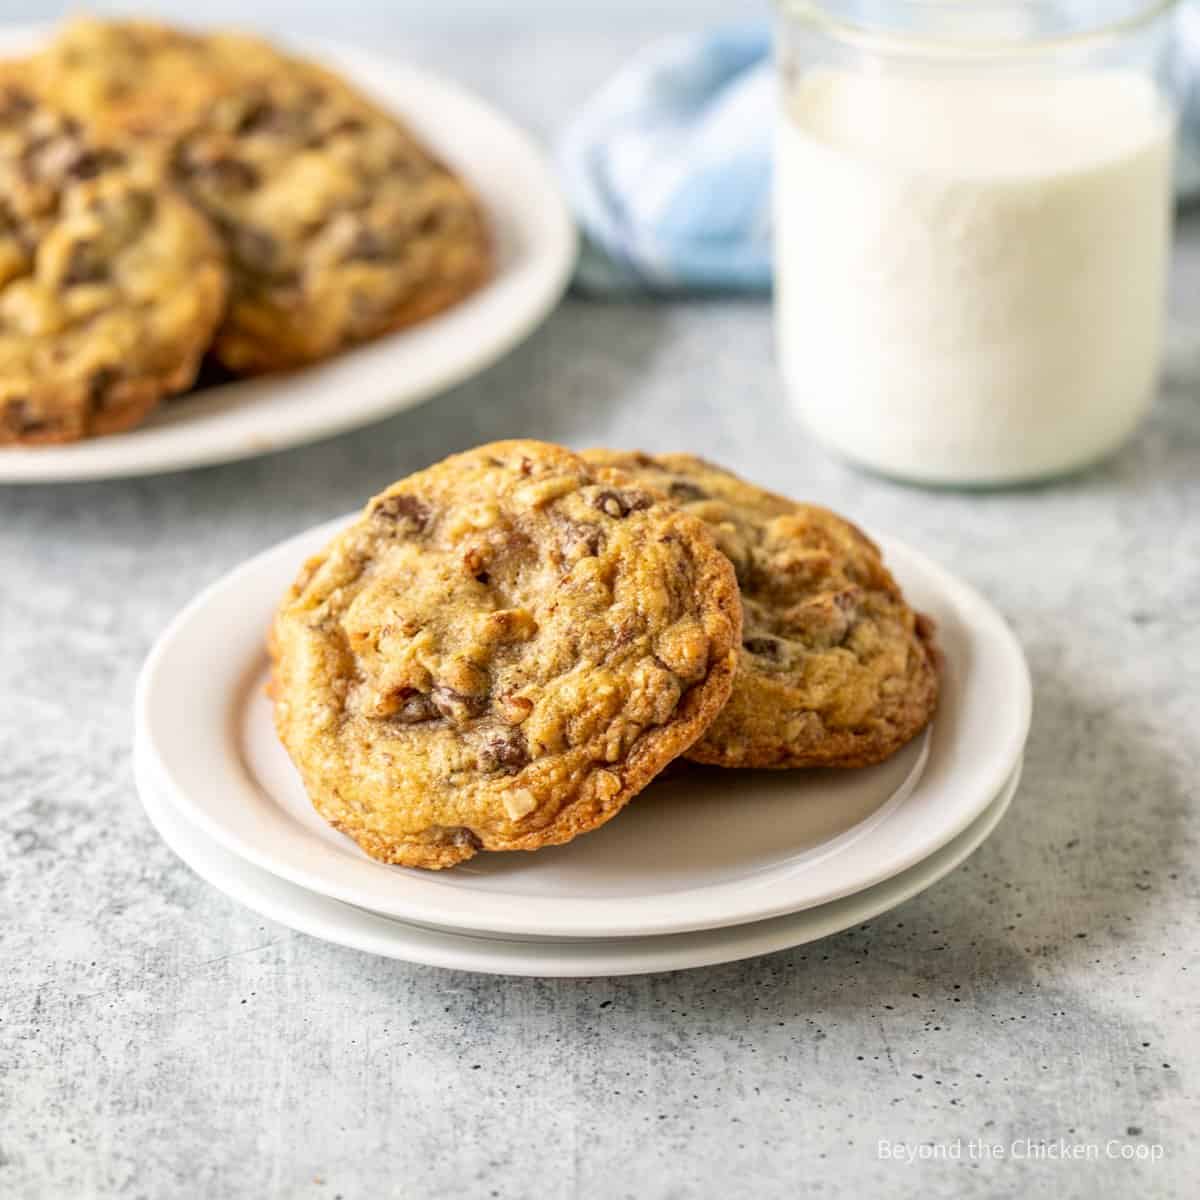 Cookies on a white plate by a glass of milk.